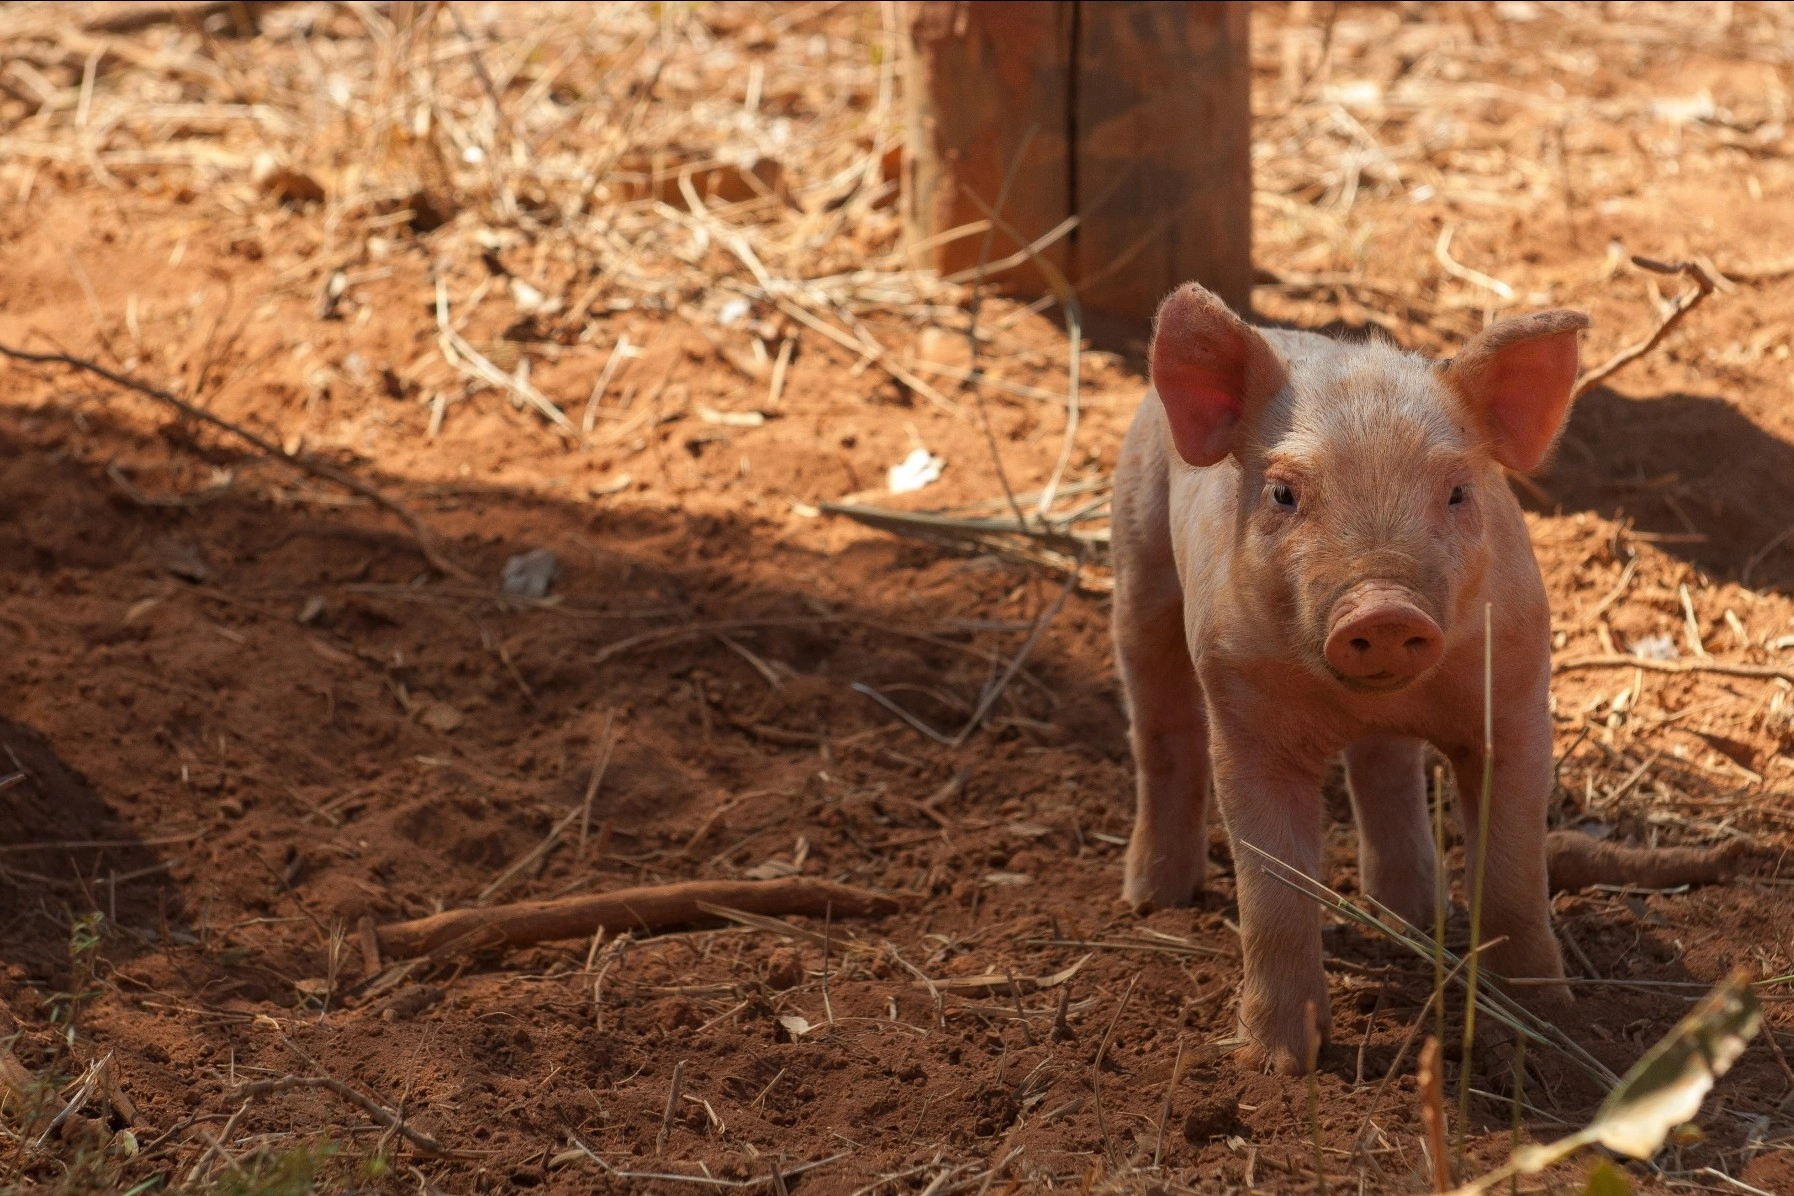 A free range pig at a farm in Brazil